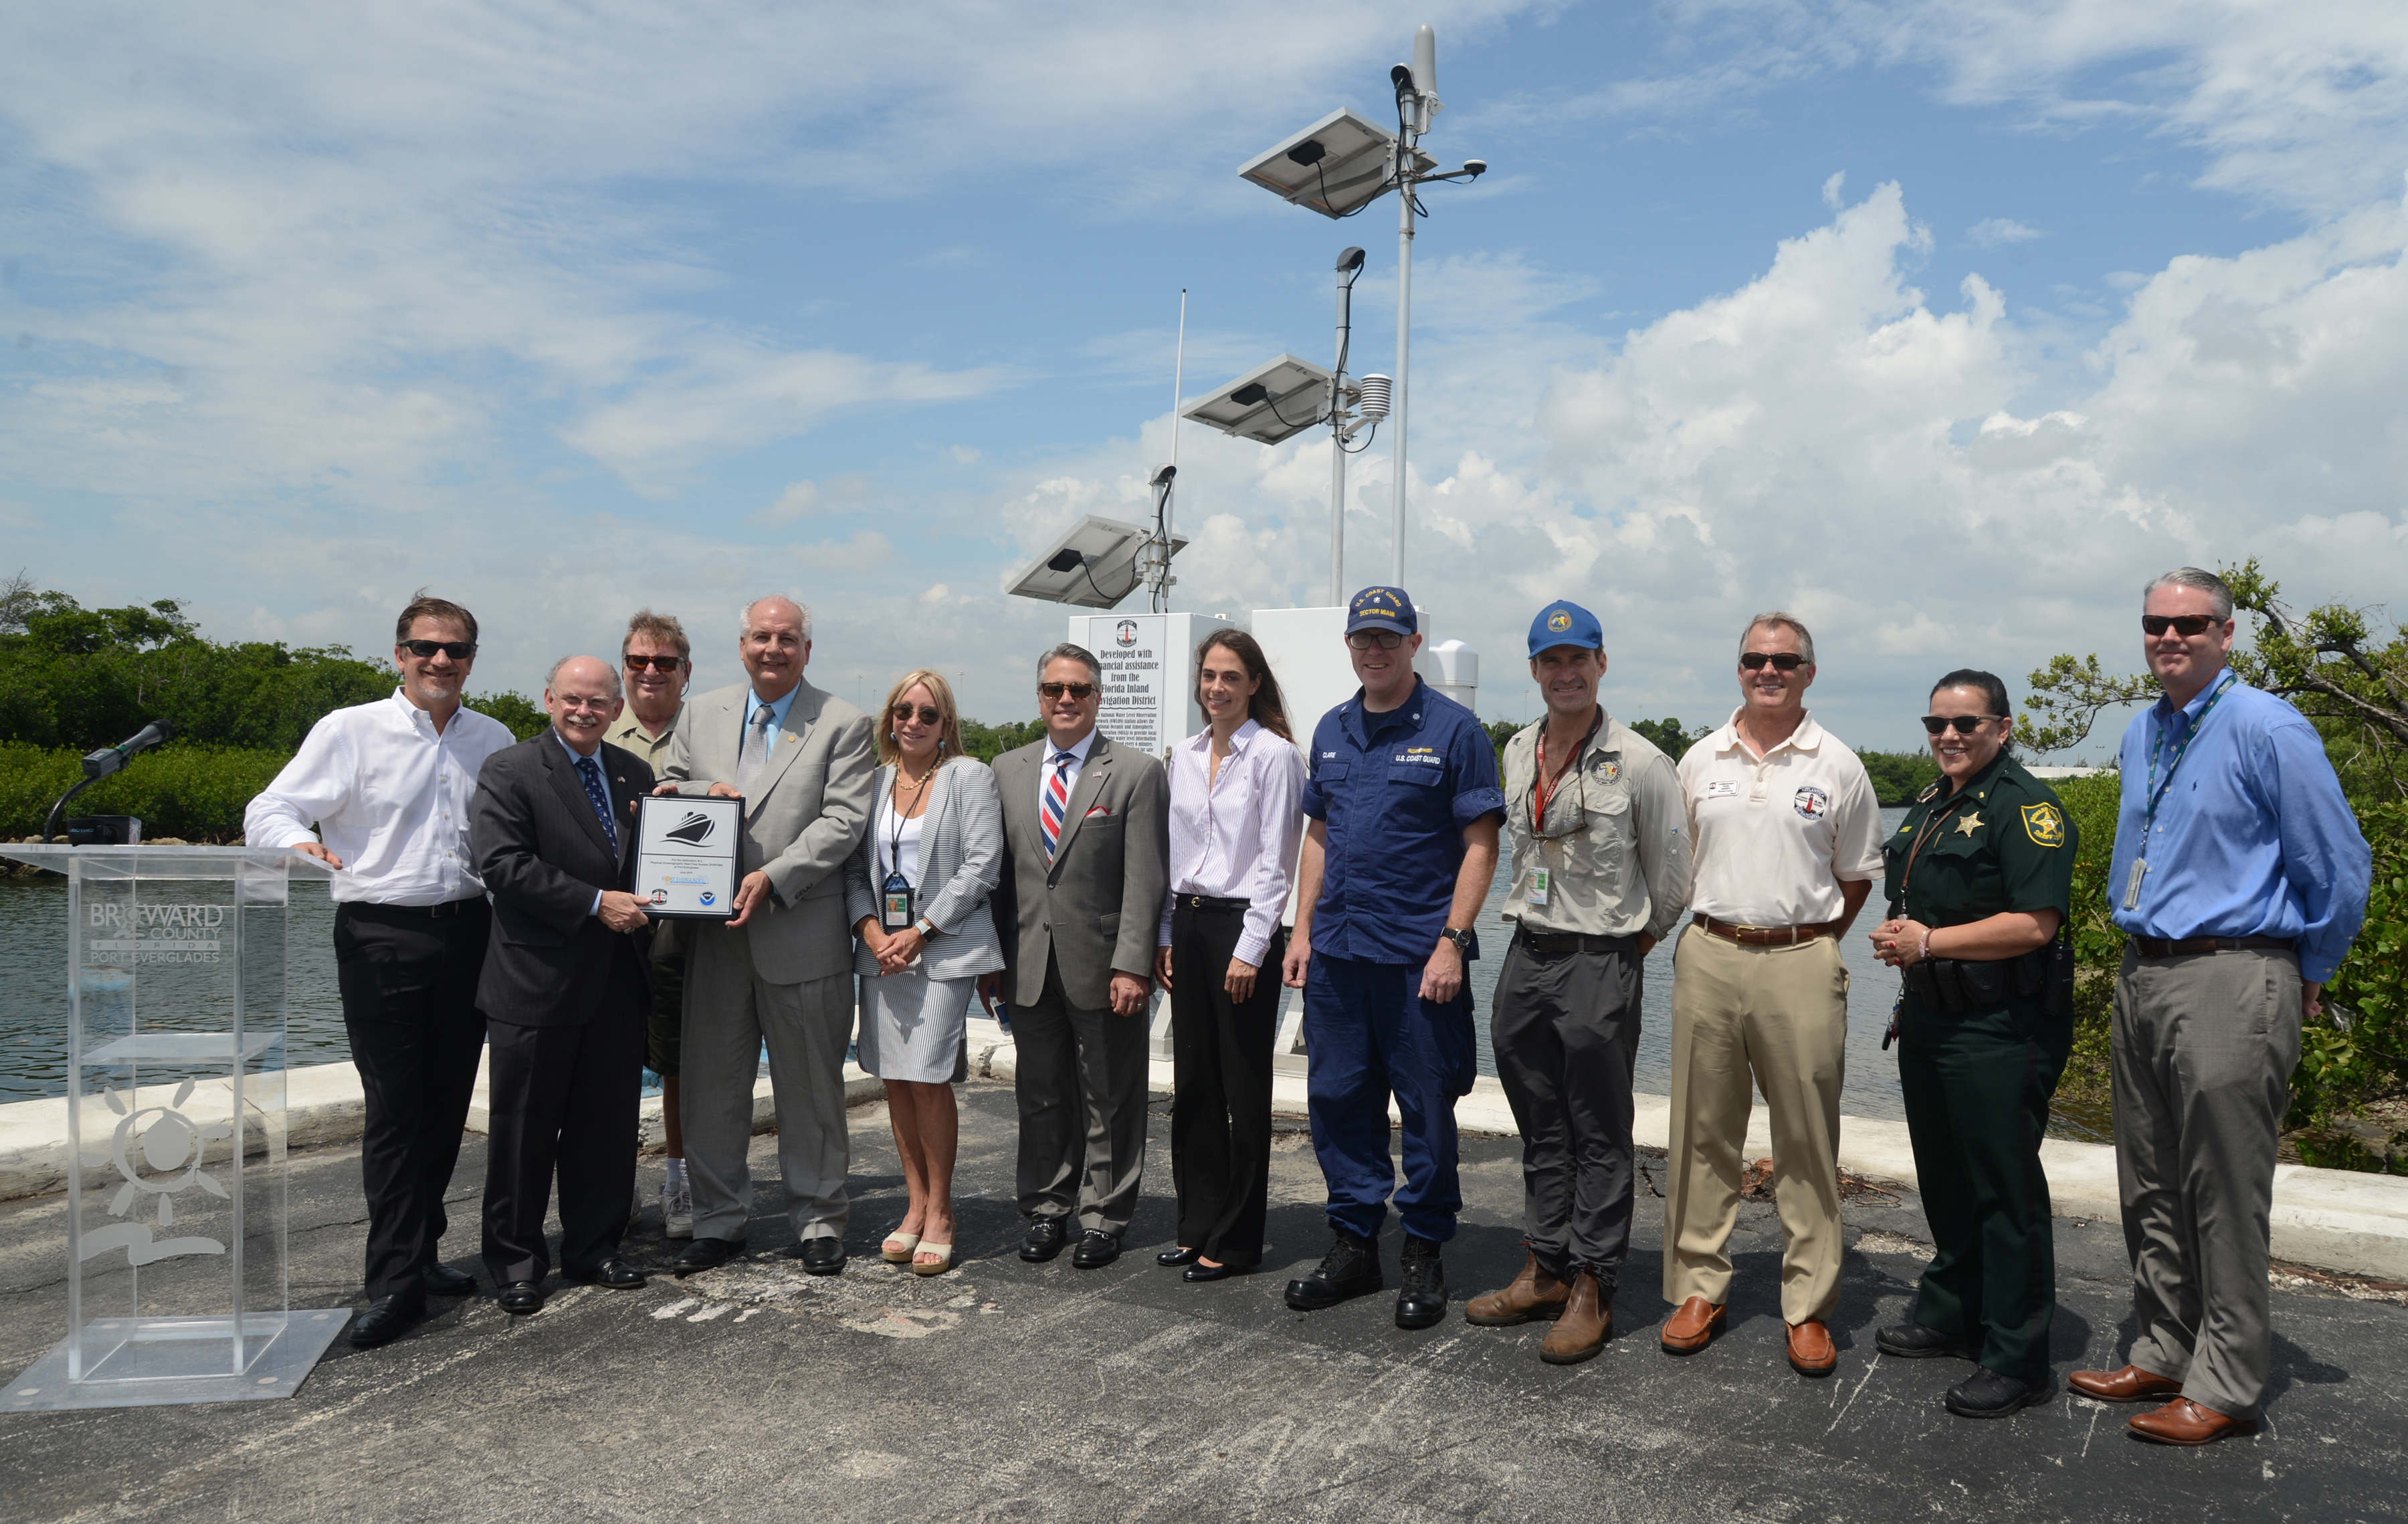 The Port Everglades community, NOAA and Broward County celebrate the installation of the Port Everglades Physical Oceanographic Real-Time System.